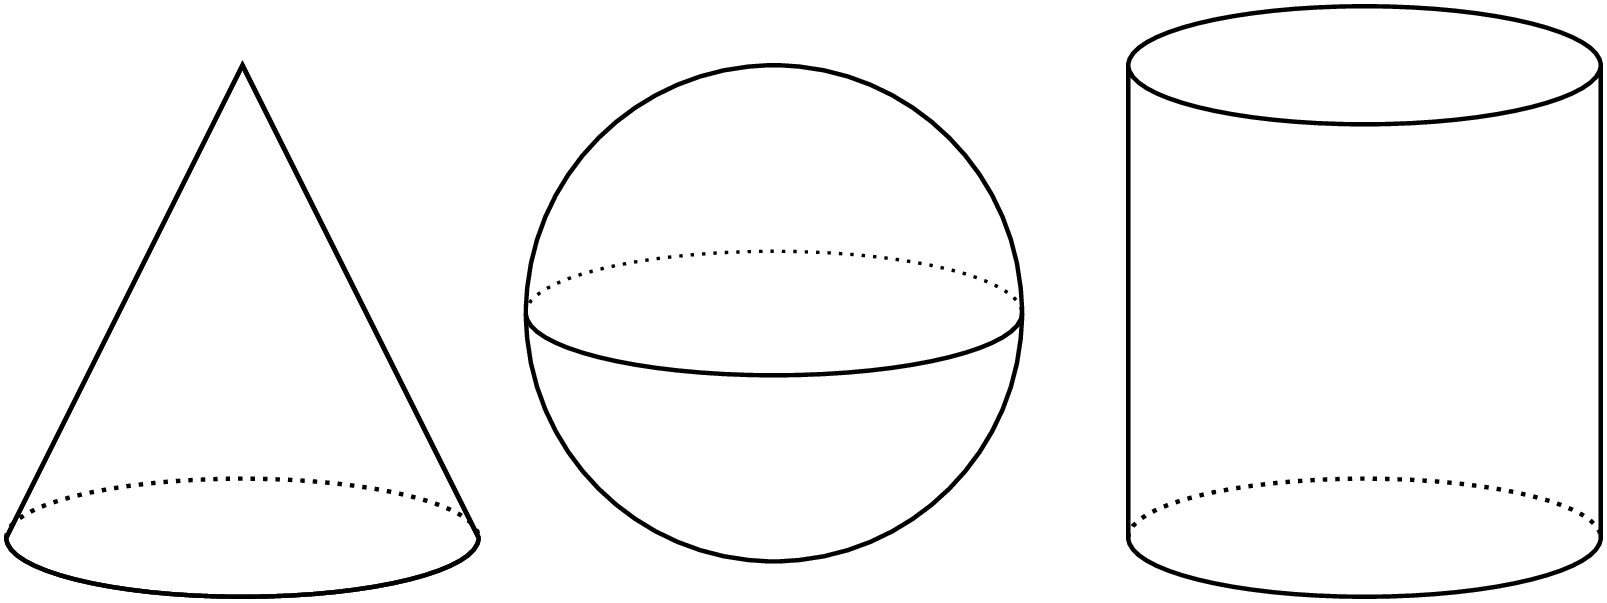 An image with three shapes: a cone, a sphere and a cylinder.